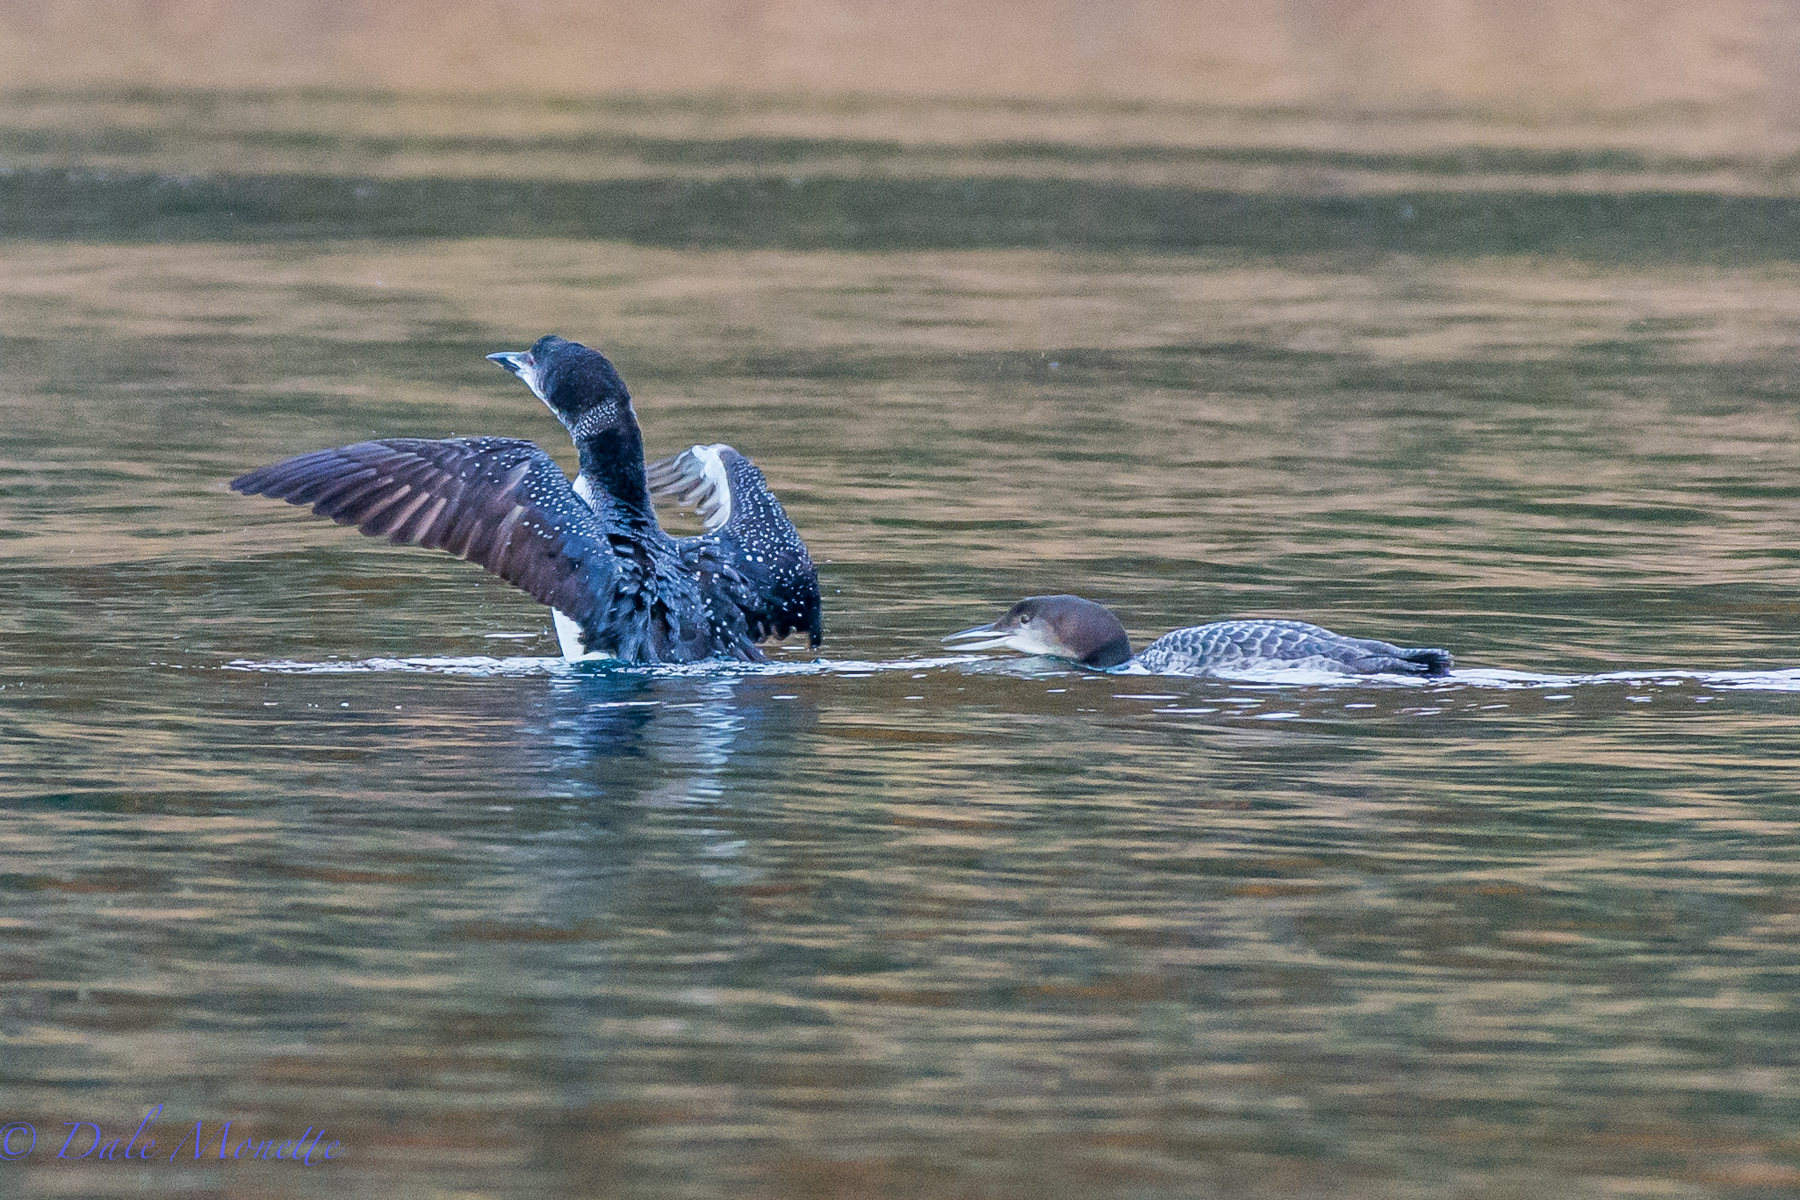 Booth the adult and the chick together early this morning on Quabbin.  10/30/15